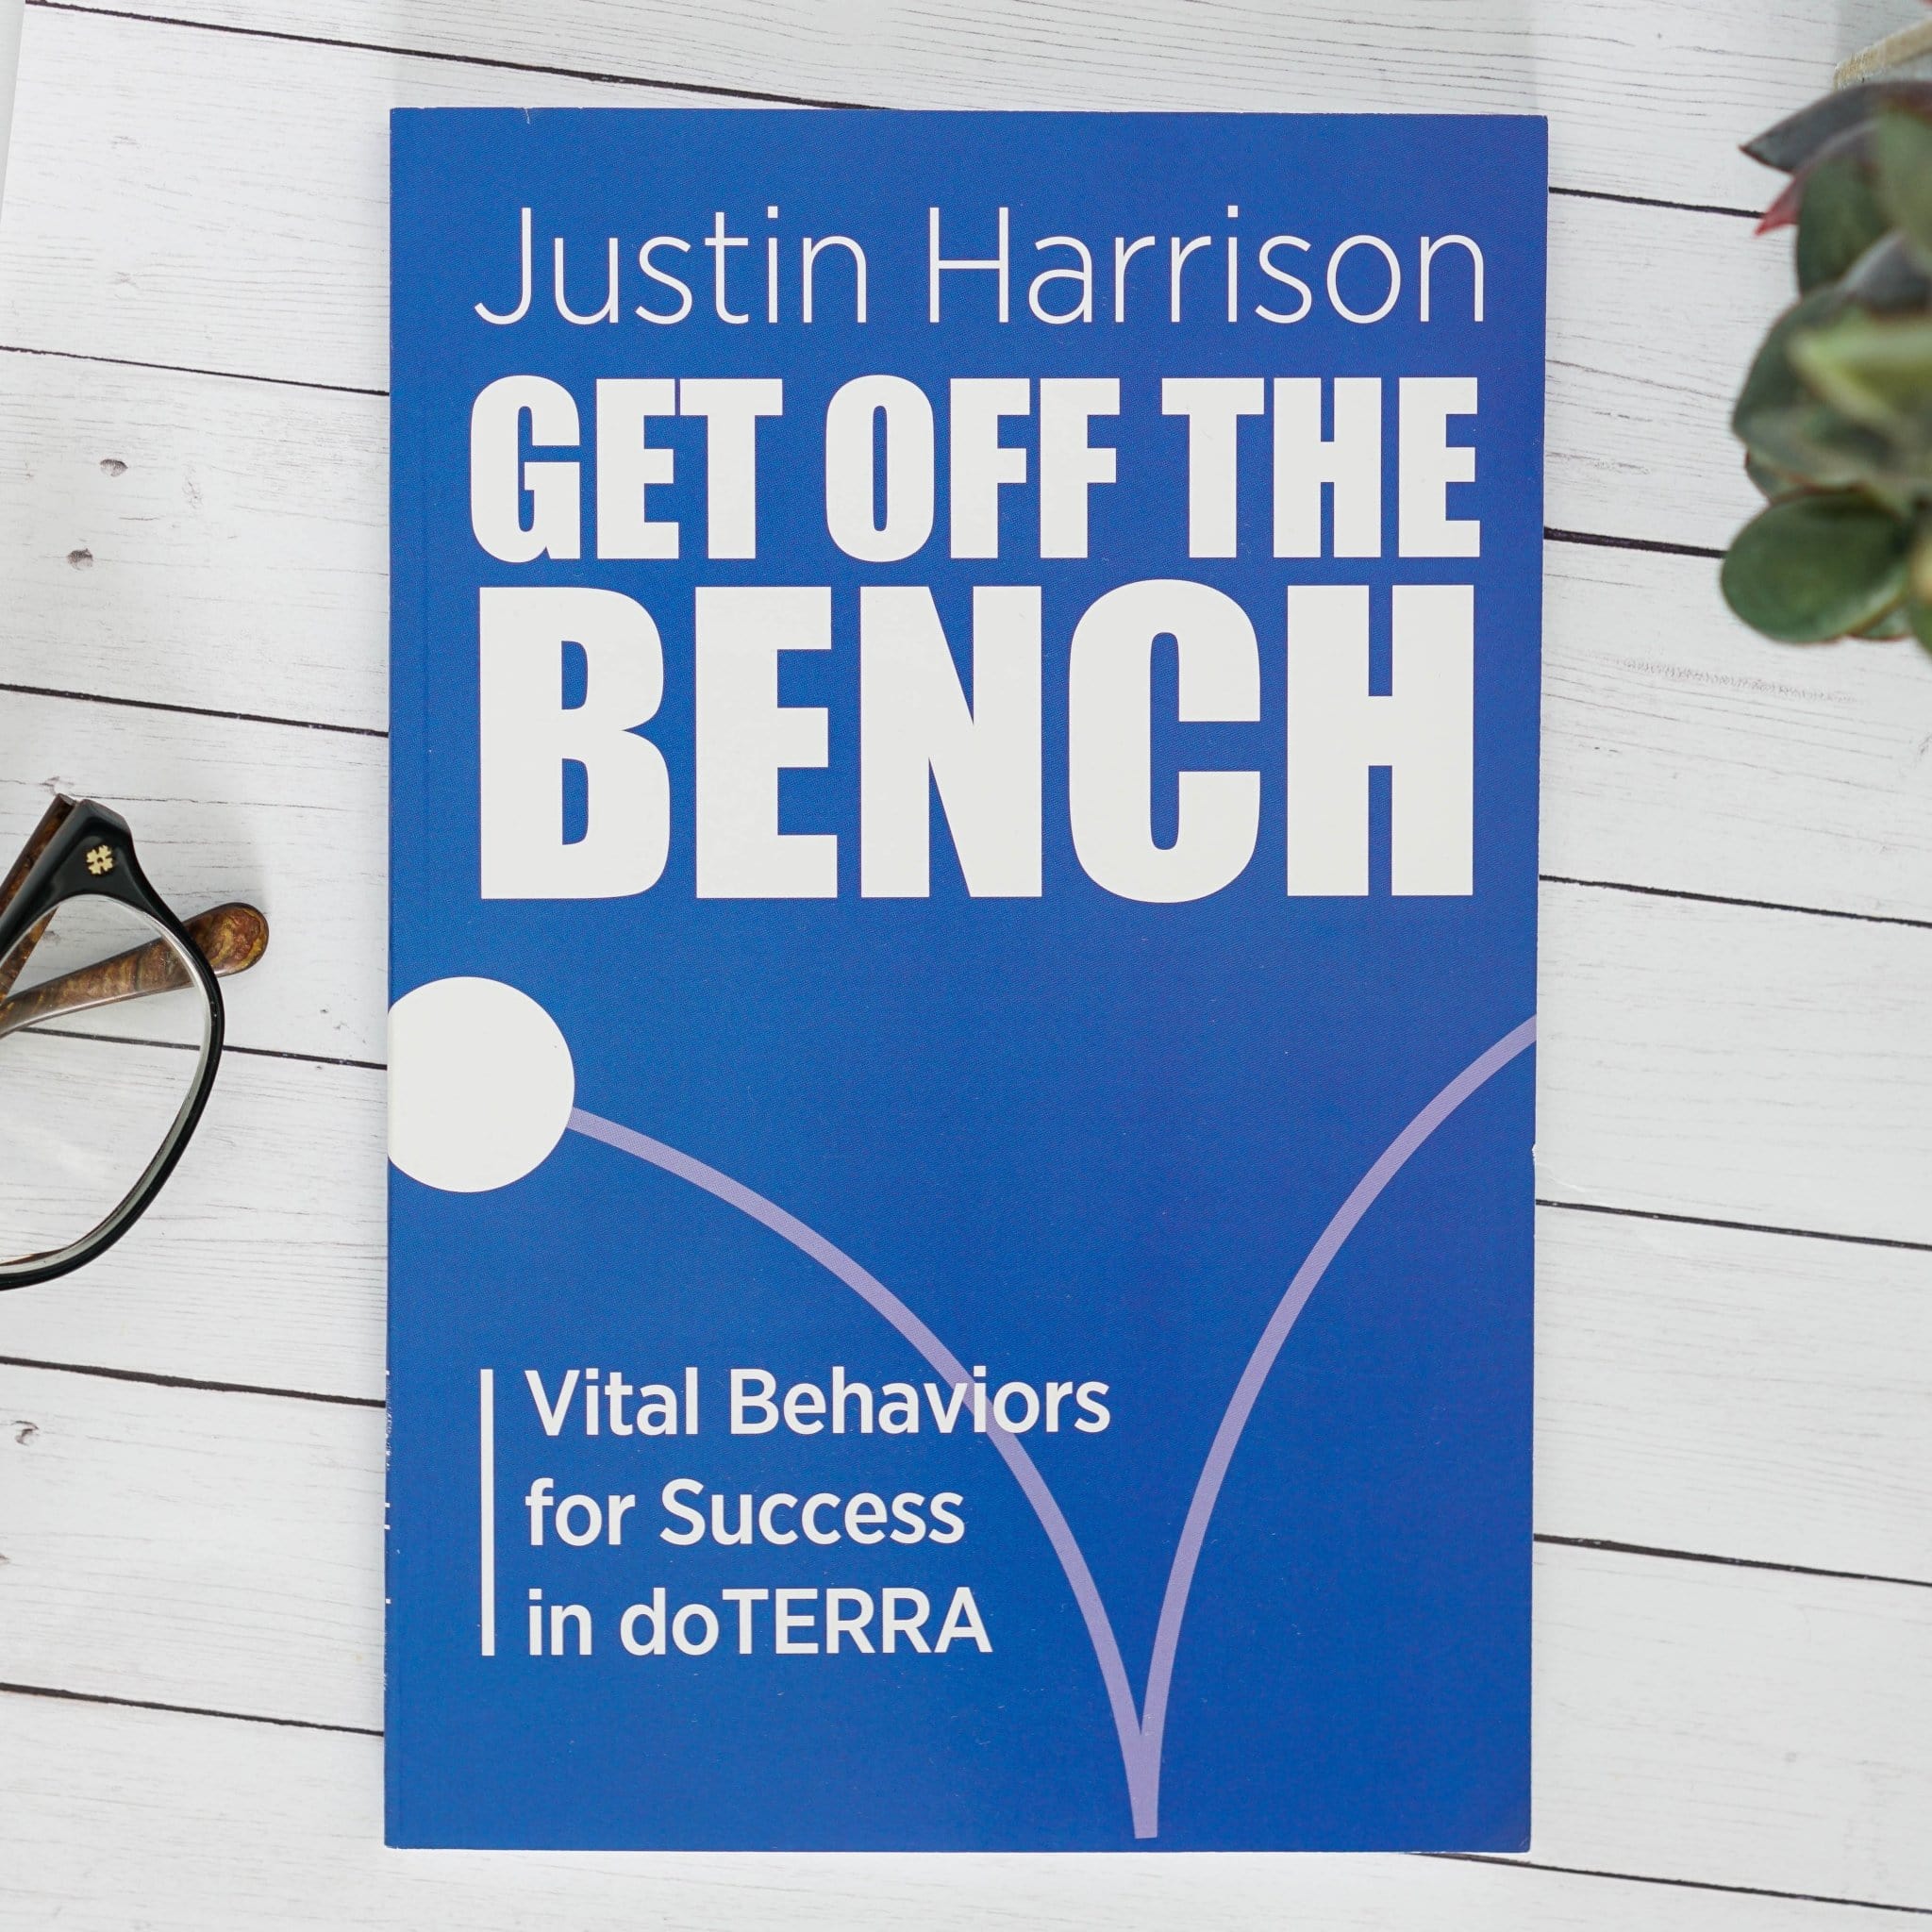 Get Off the Bench 3rd - Justin Harrison - Oil Life